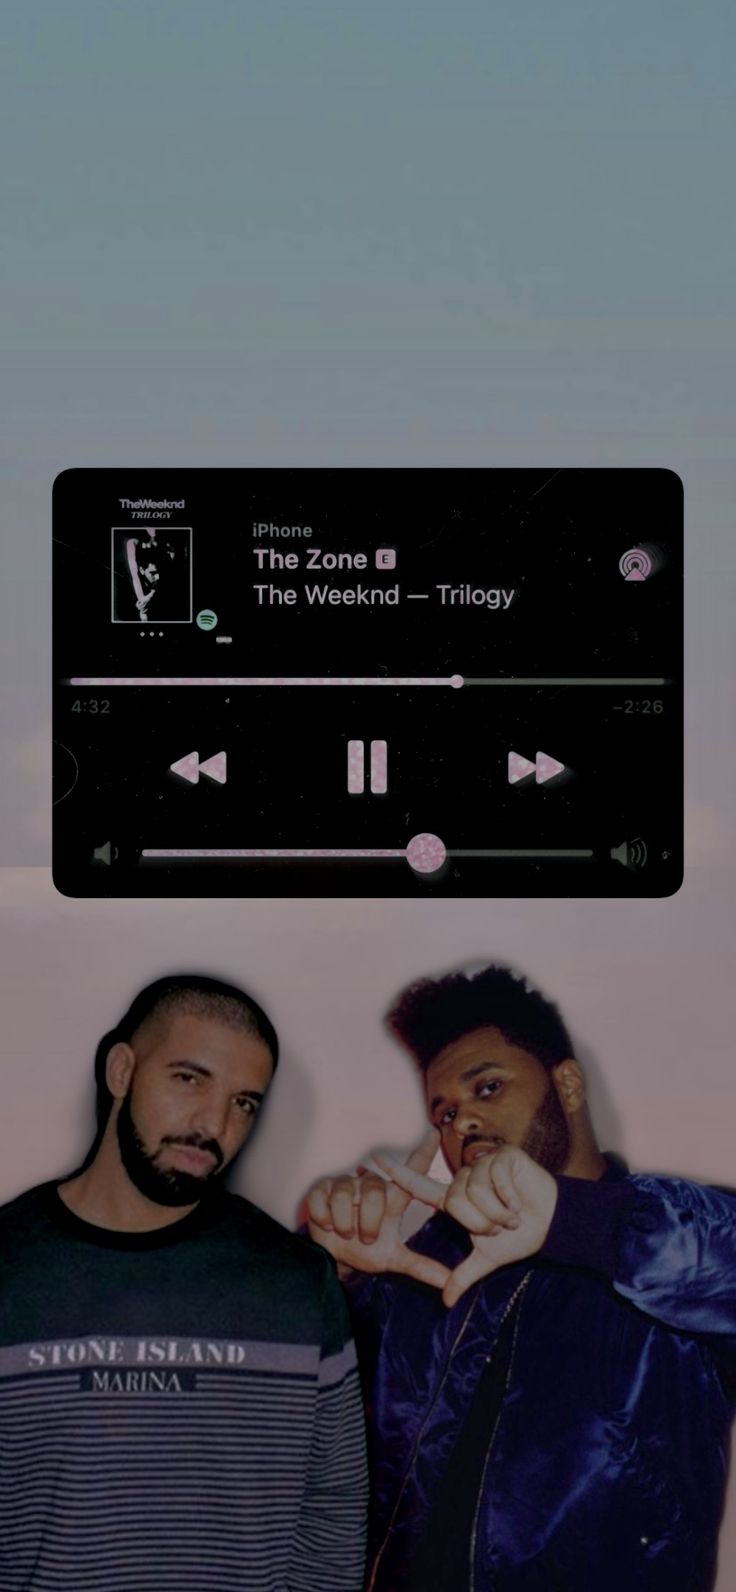 the weeknd and drake lock screen. The weeknd, The weeknd trilogy, Drake